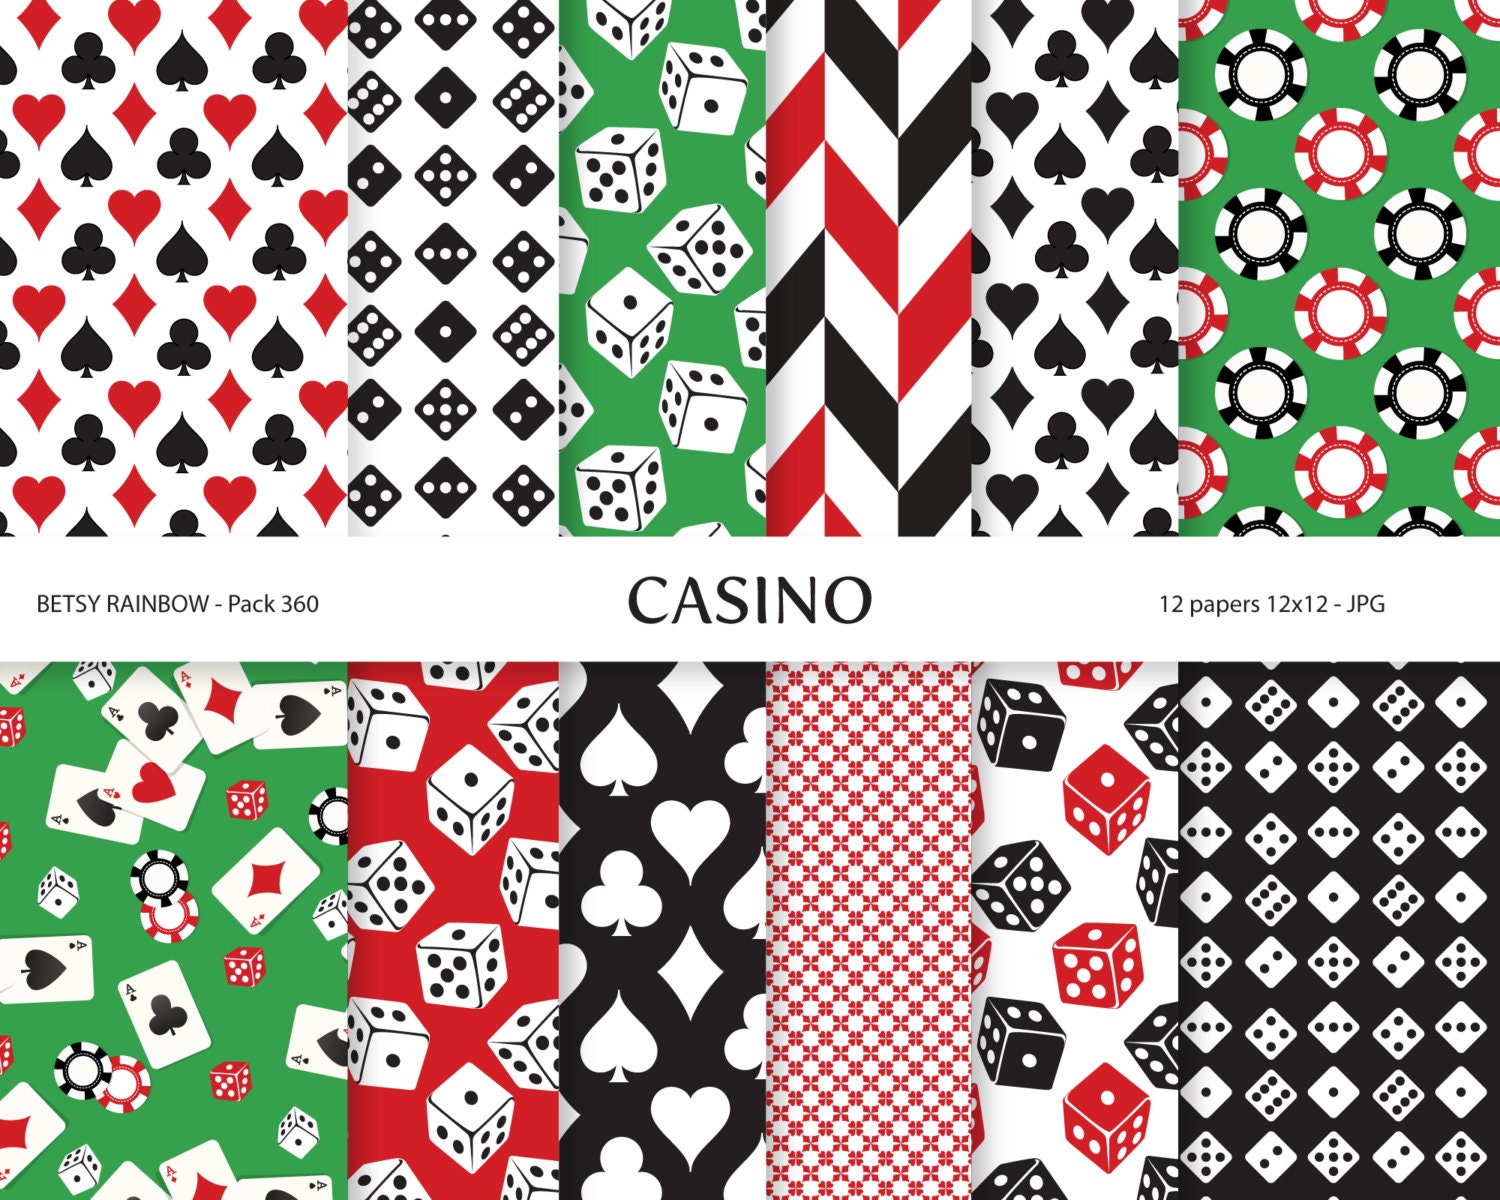 Casino Digital Paper pack dice playing cards casino